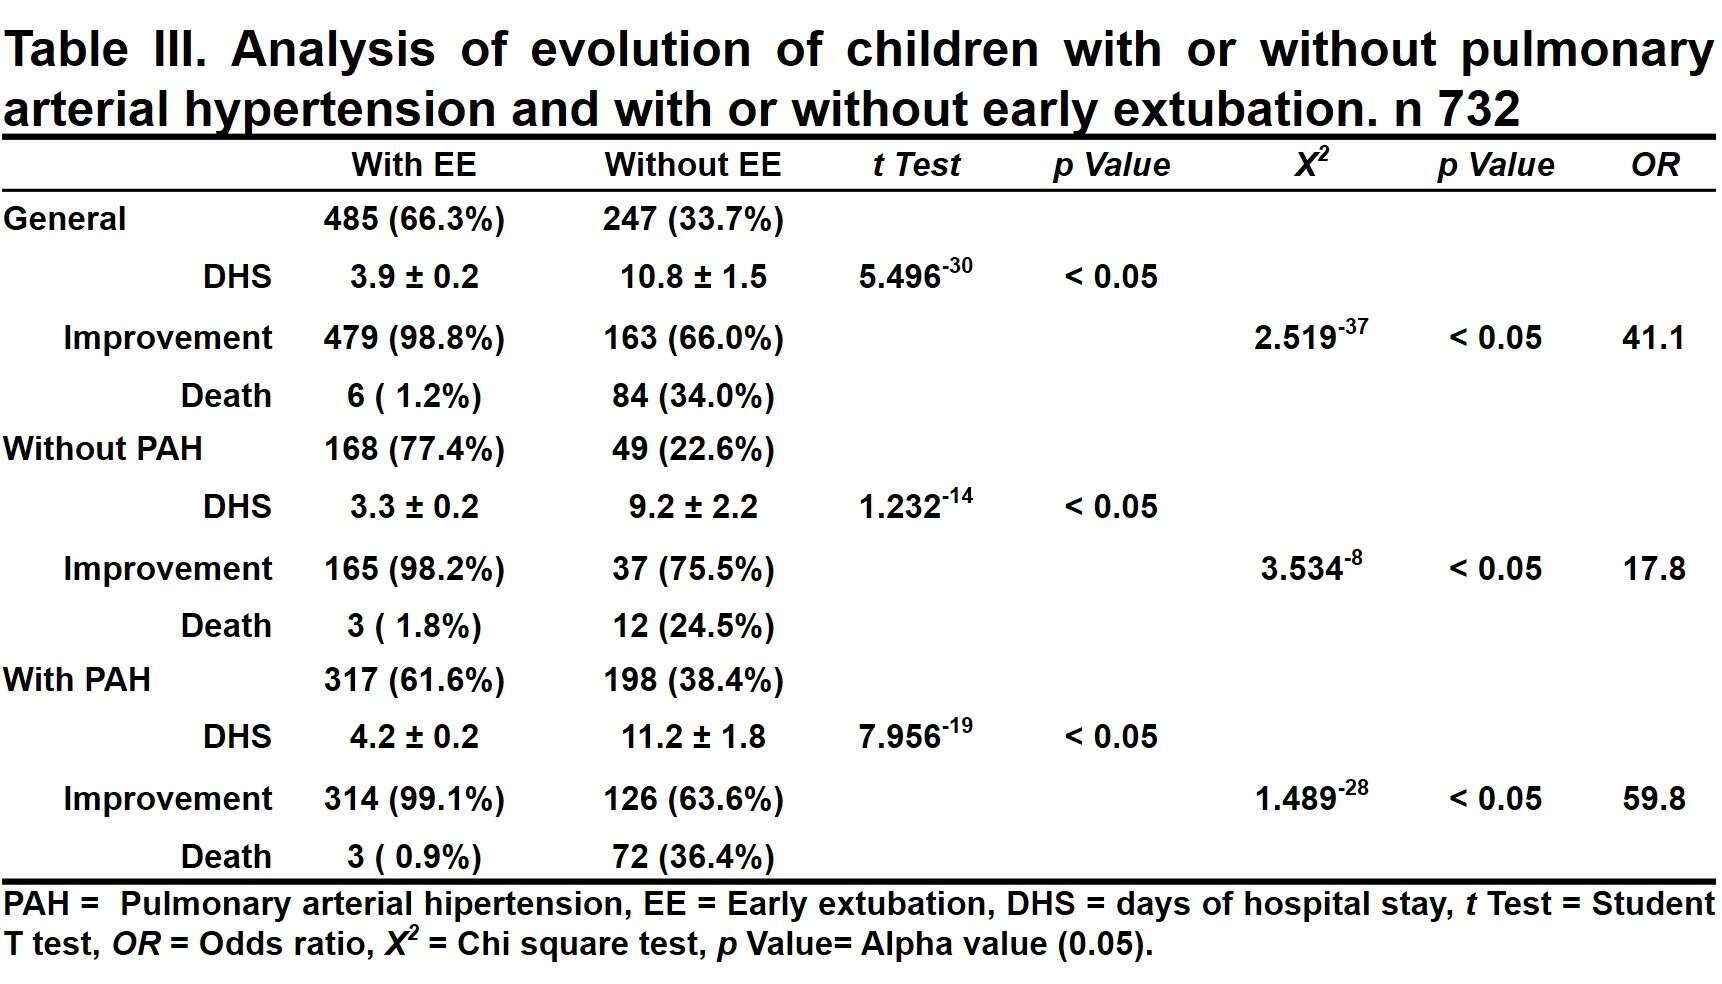 Table III. Analysis of the evolution of children with or without pulmonary arterial hypertension and with or without early extubation